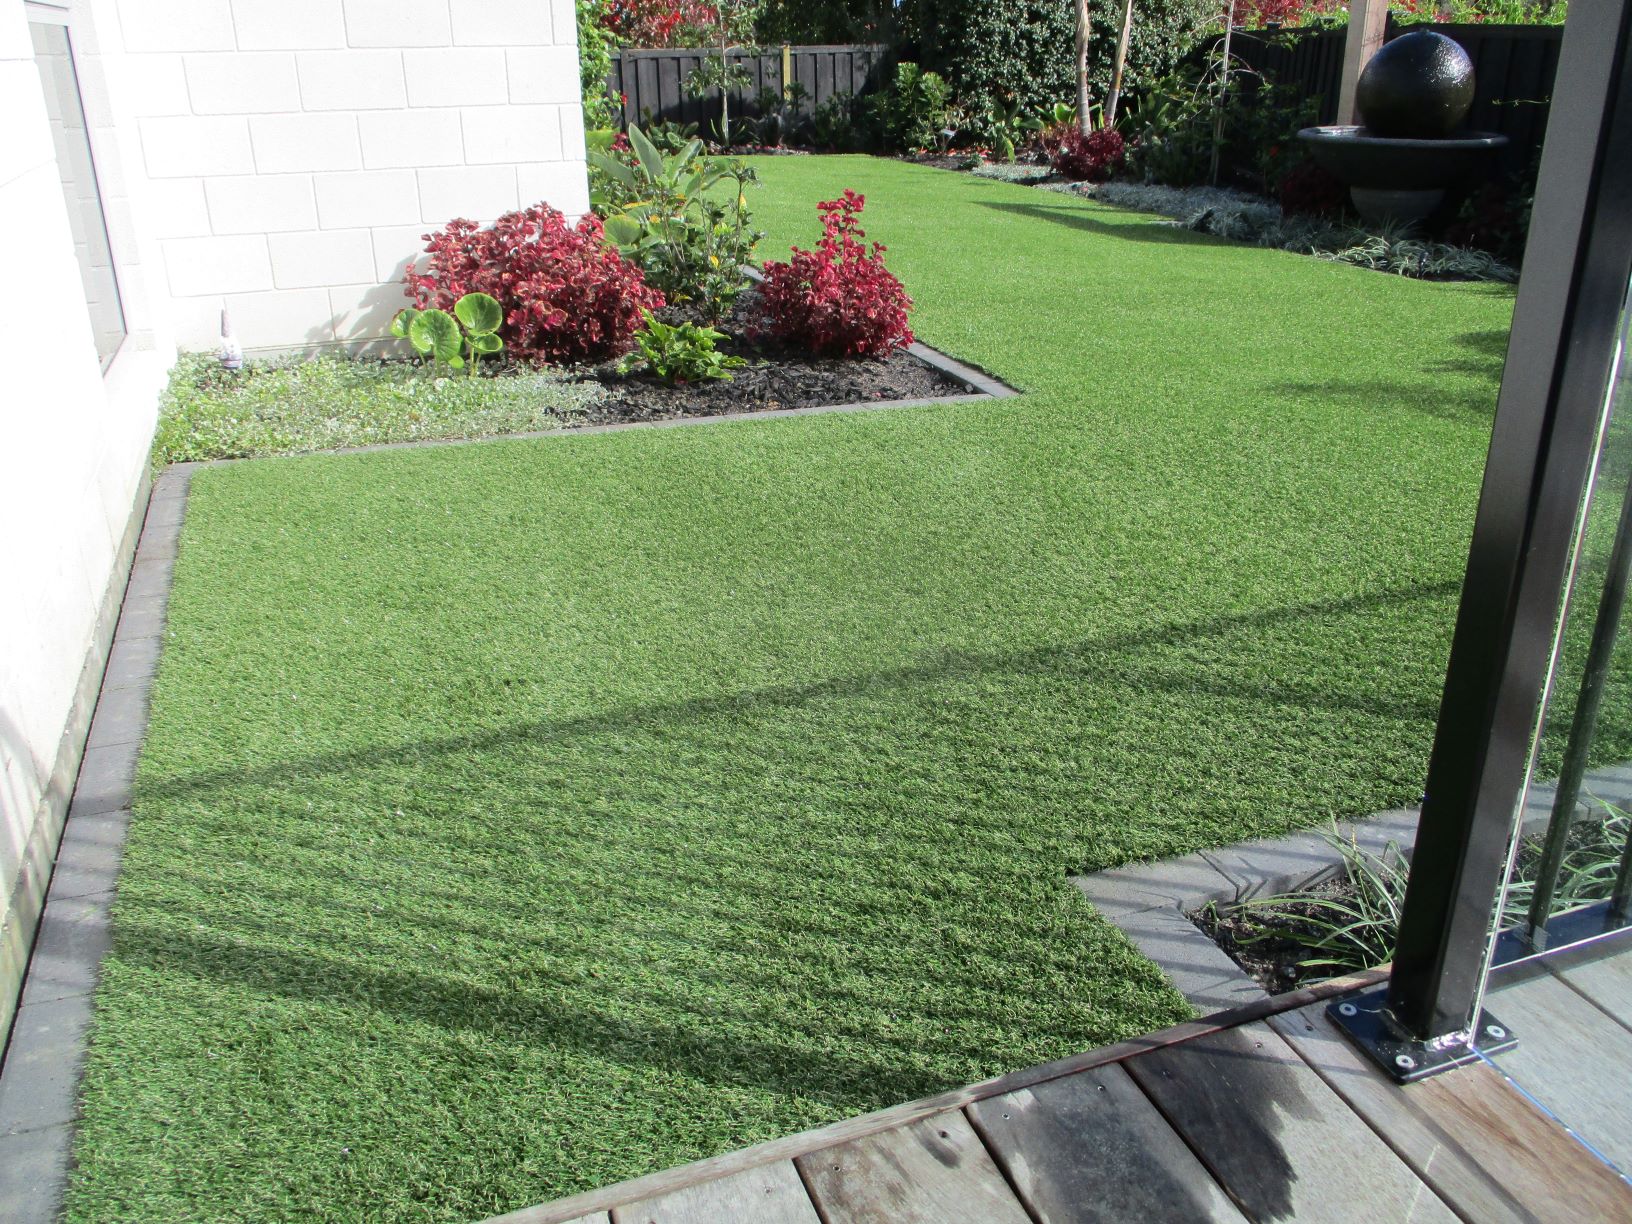 None of the challenges or hard work for homeowners wanting the perfect lawn   